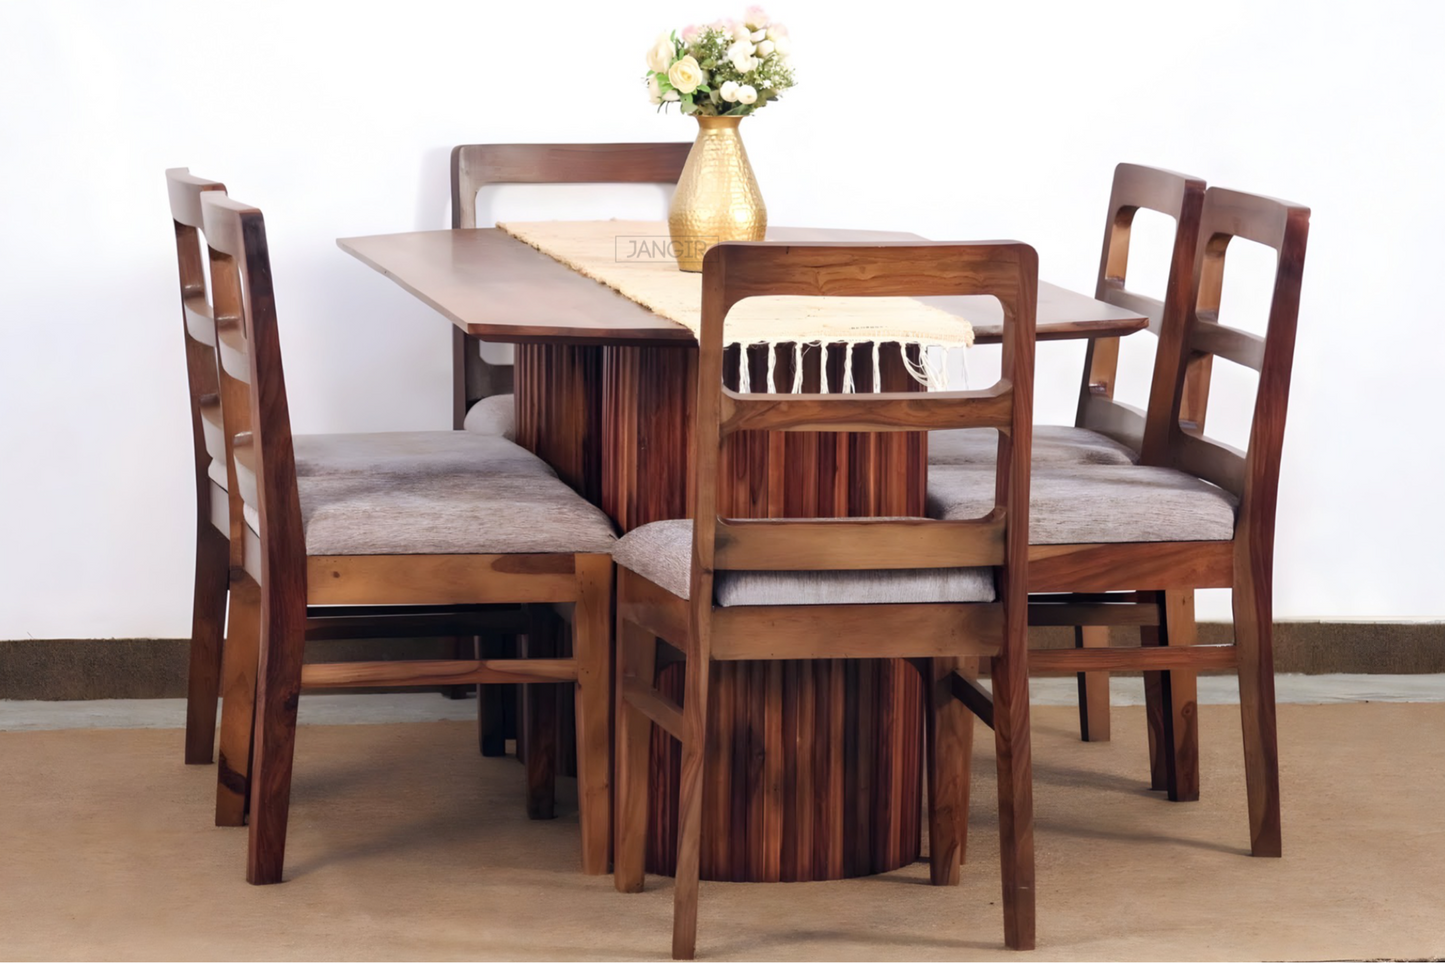 Looking for a modern and stylish dining table set? Check out our exquisite dining table set, crafted with sheesham wood, perfect for six-seater gatherings. Buy online or in-store at Bangalore today!